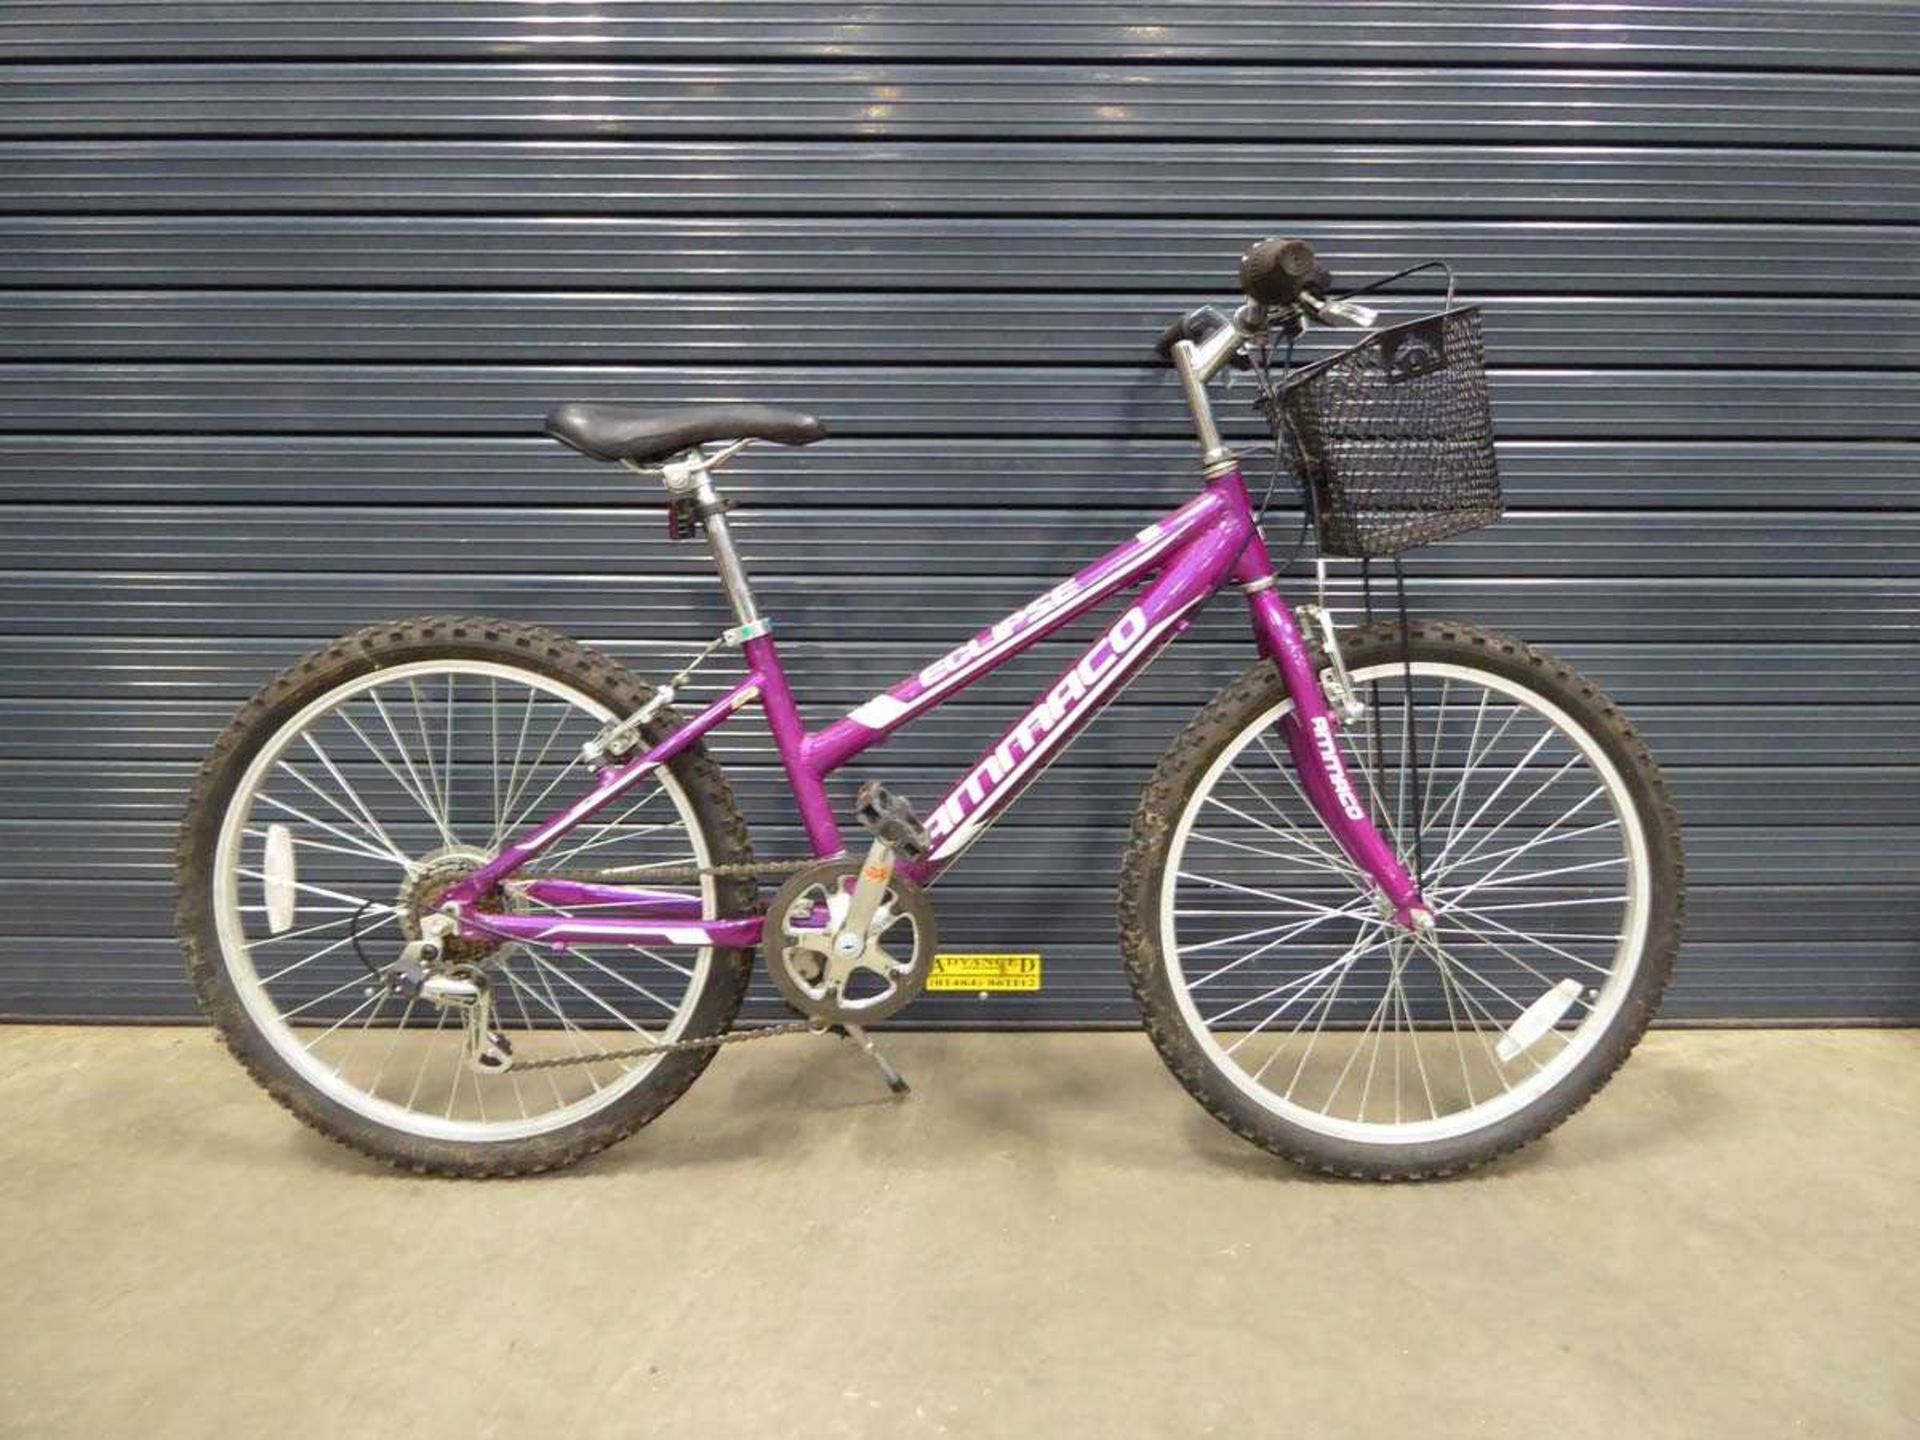 Ammaco Eclipse pink girls mountain bike with front basket